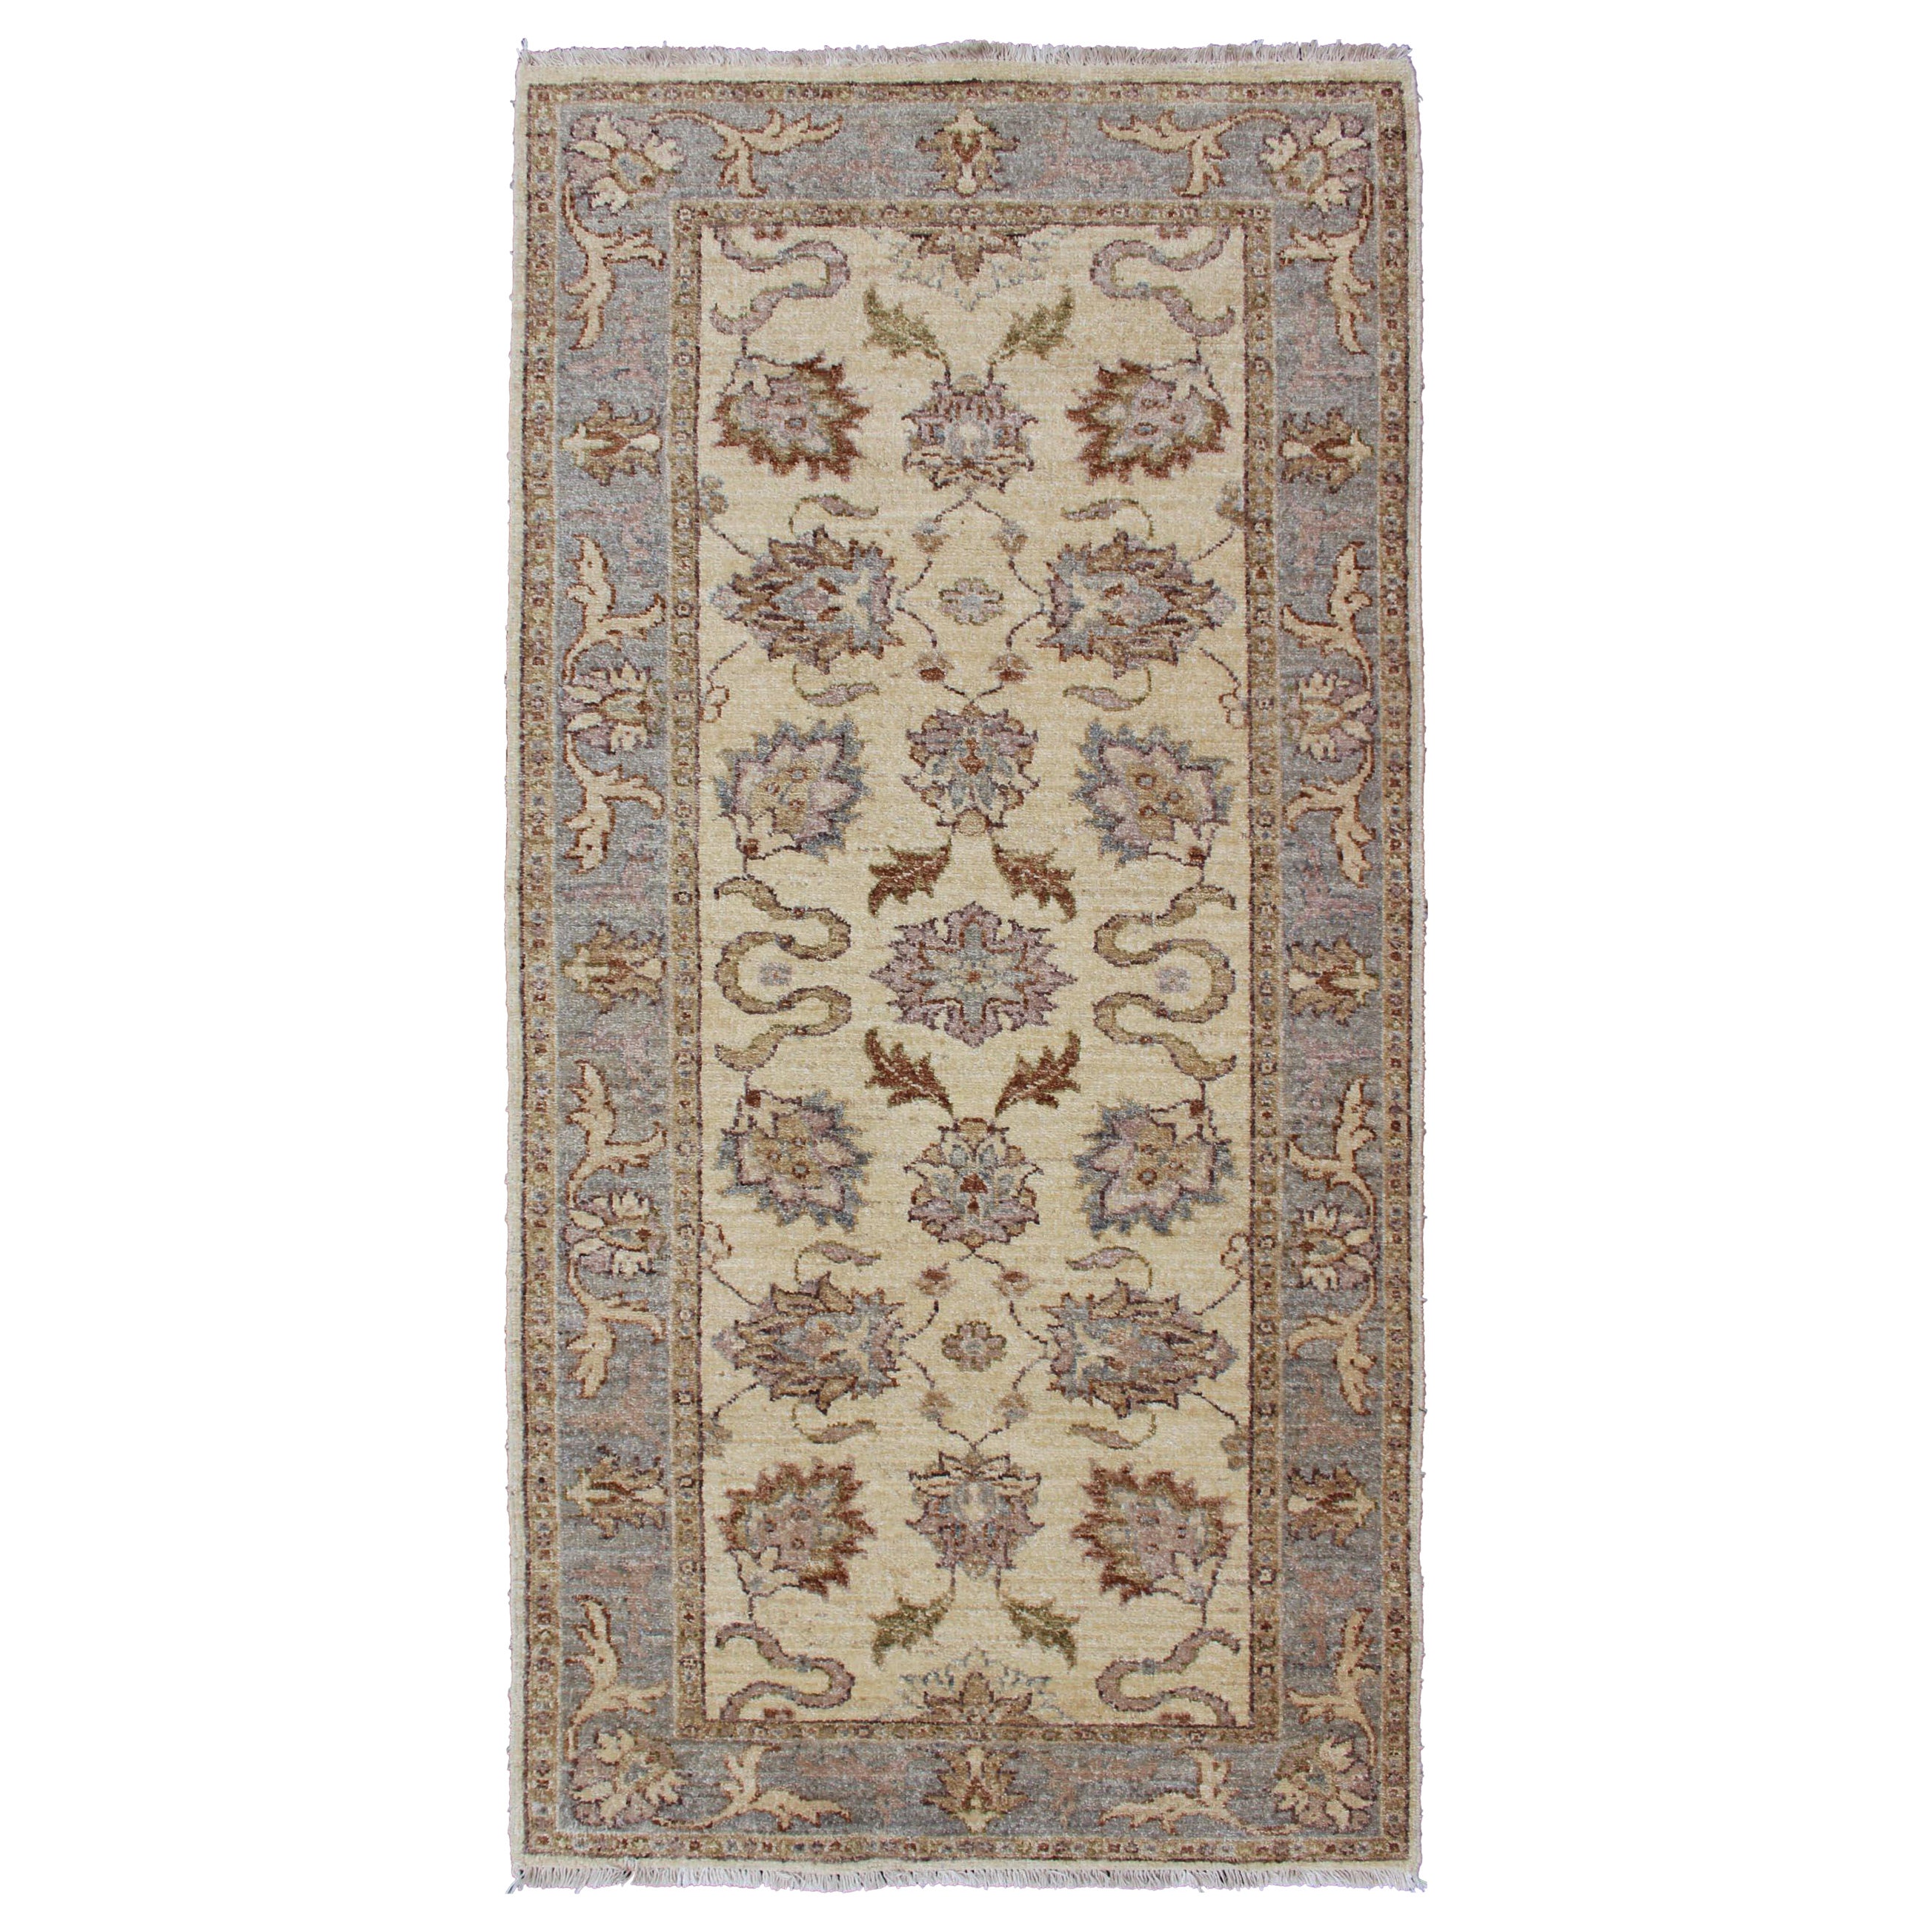 Modern Afghan Floral Pattern Short Runner in Earth Tones with Browns and Cream For Sale